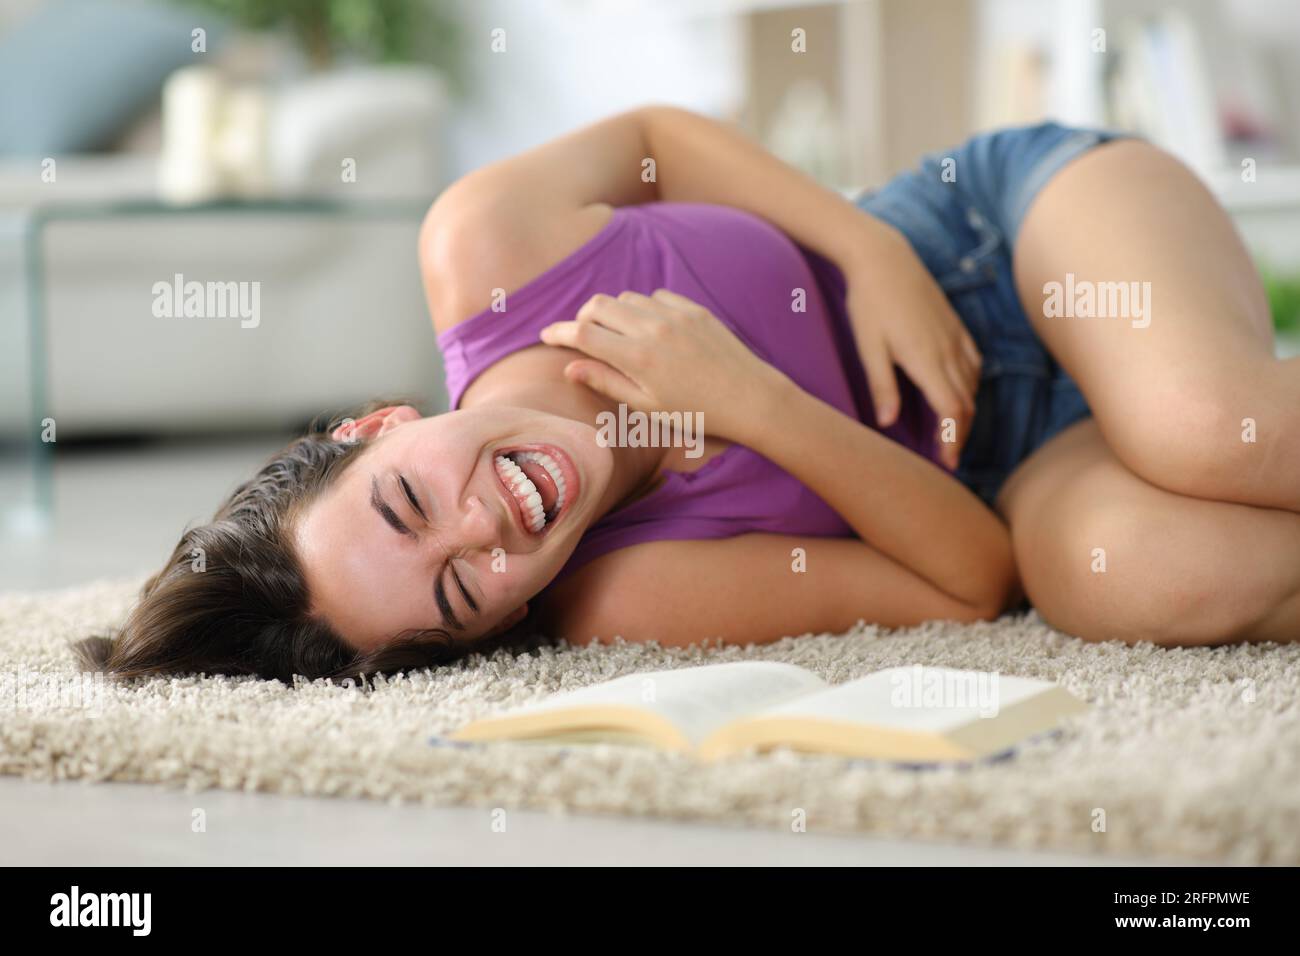 Happy woman laughing hilarious alone lying on a carpet at home Stock Photo